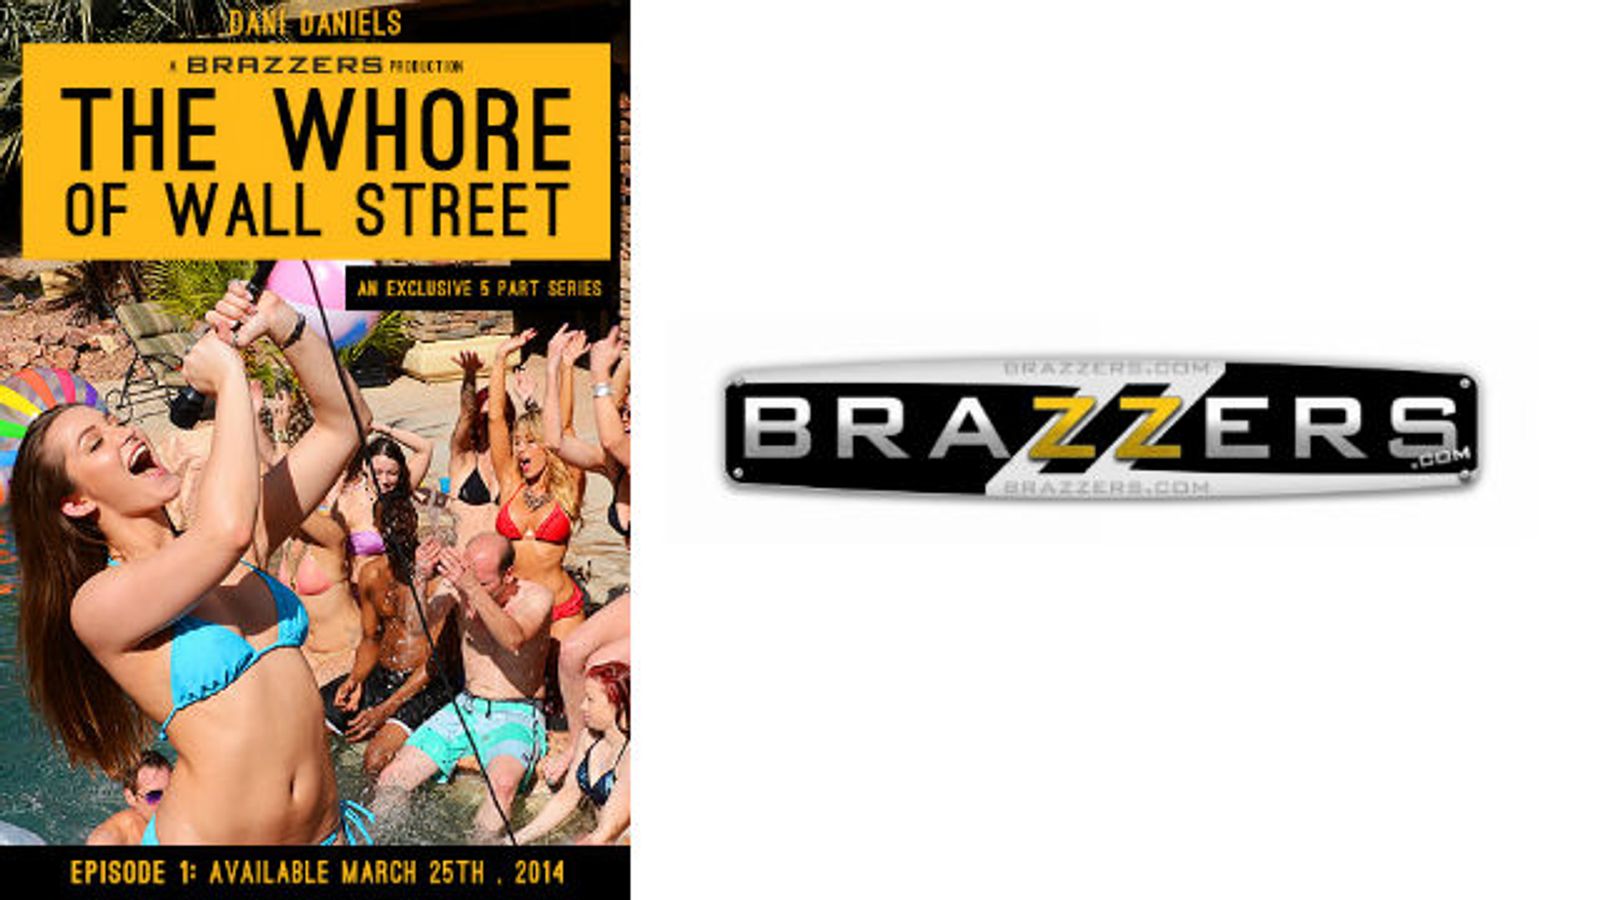 Episode One of 5-Part ‘Whore of Wall Street’ Now on Brazzers.com